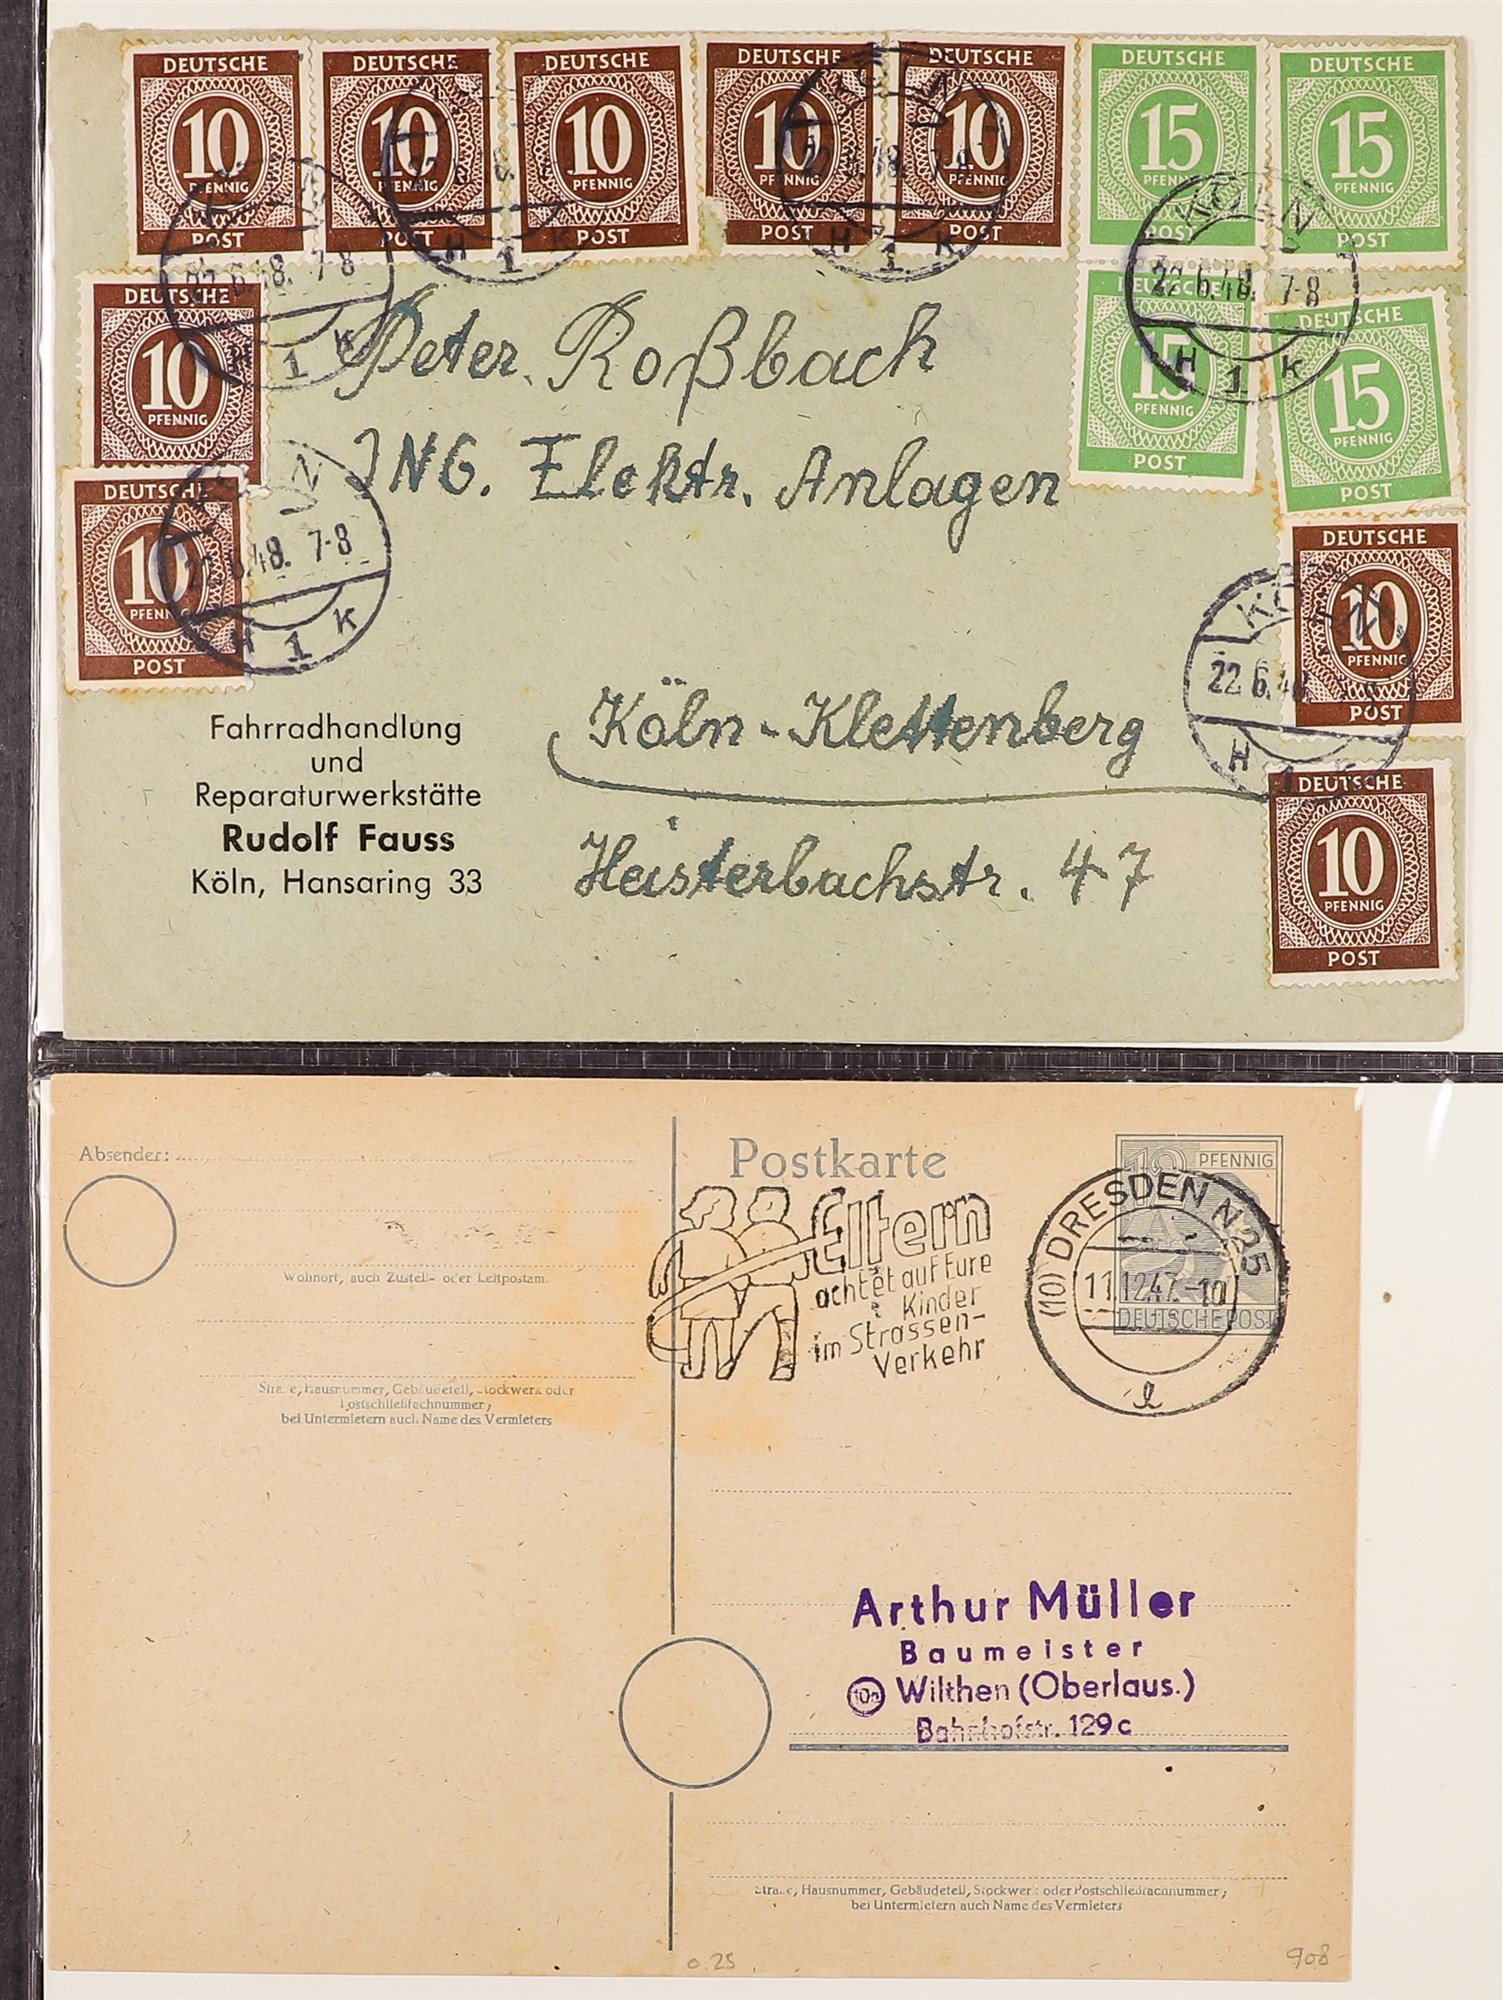 GERMAN ALLIED ZONES 1945 - 1951 COVERS COLLECTION around 60 items from various allied zones, - Image 16 of 16